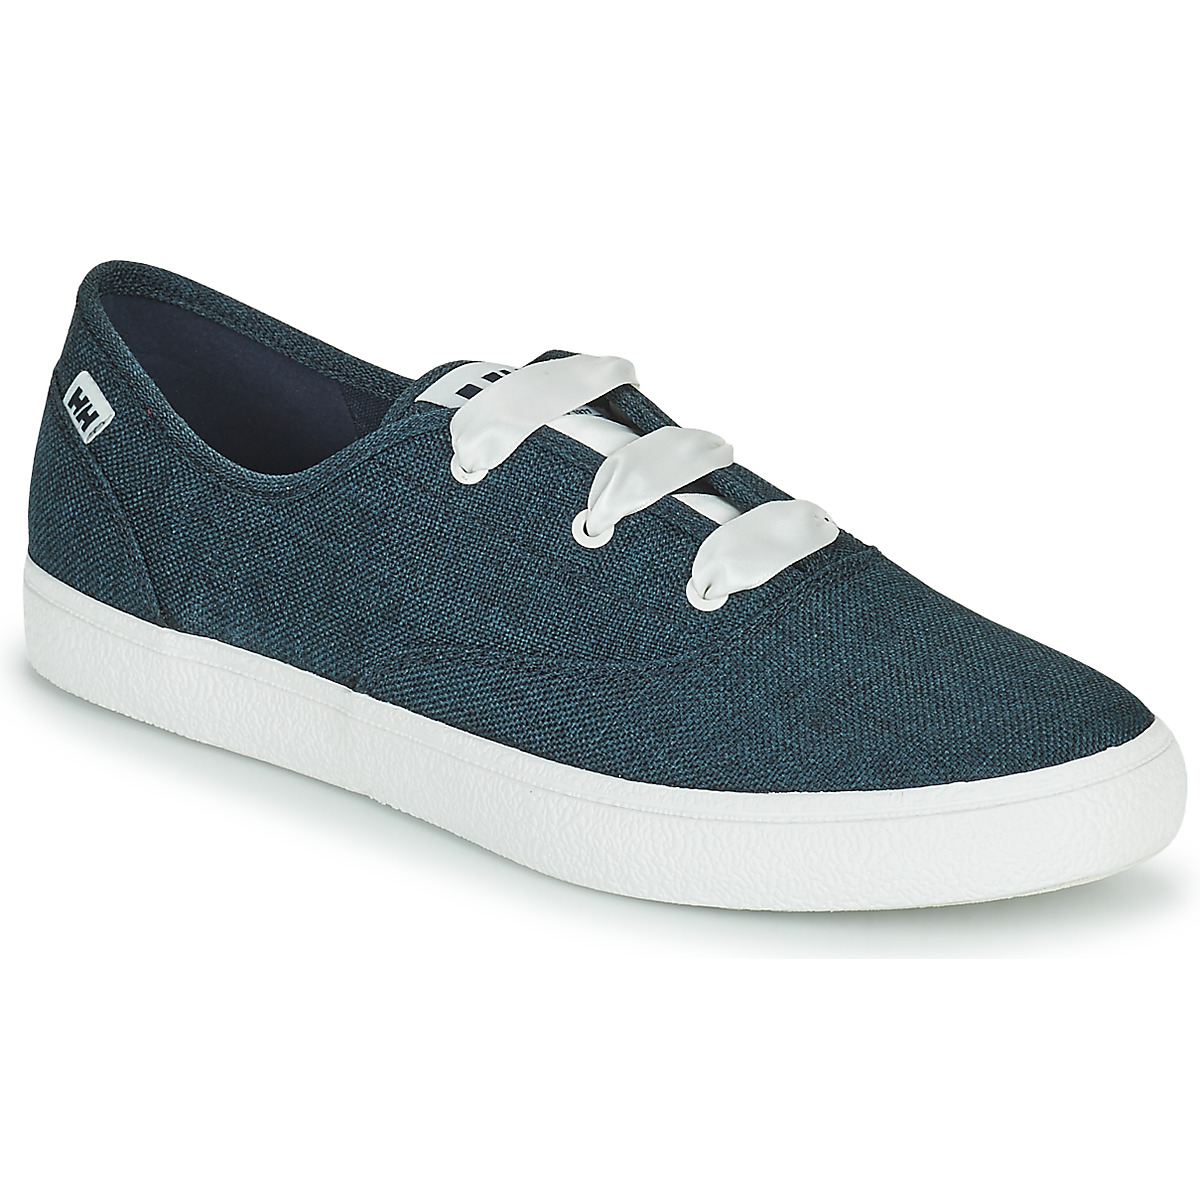 Scarpe Donna Sneakers basse Helly Hansen WILLOW LACE Marine